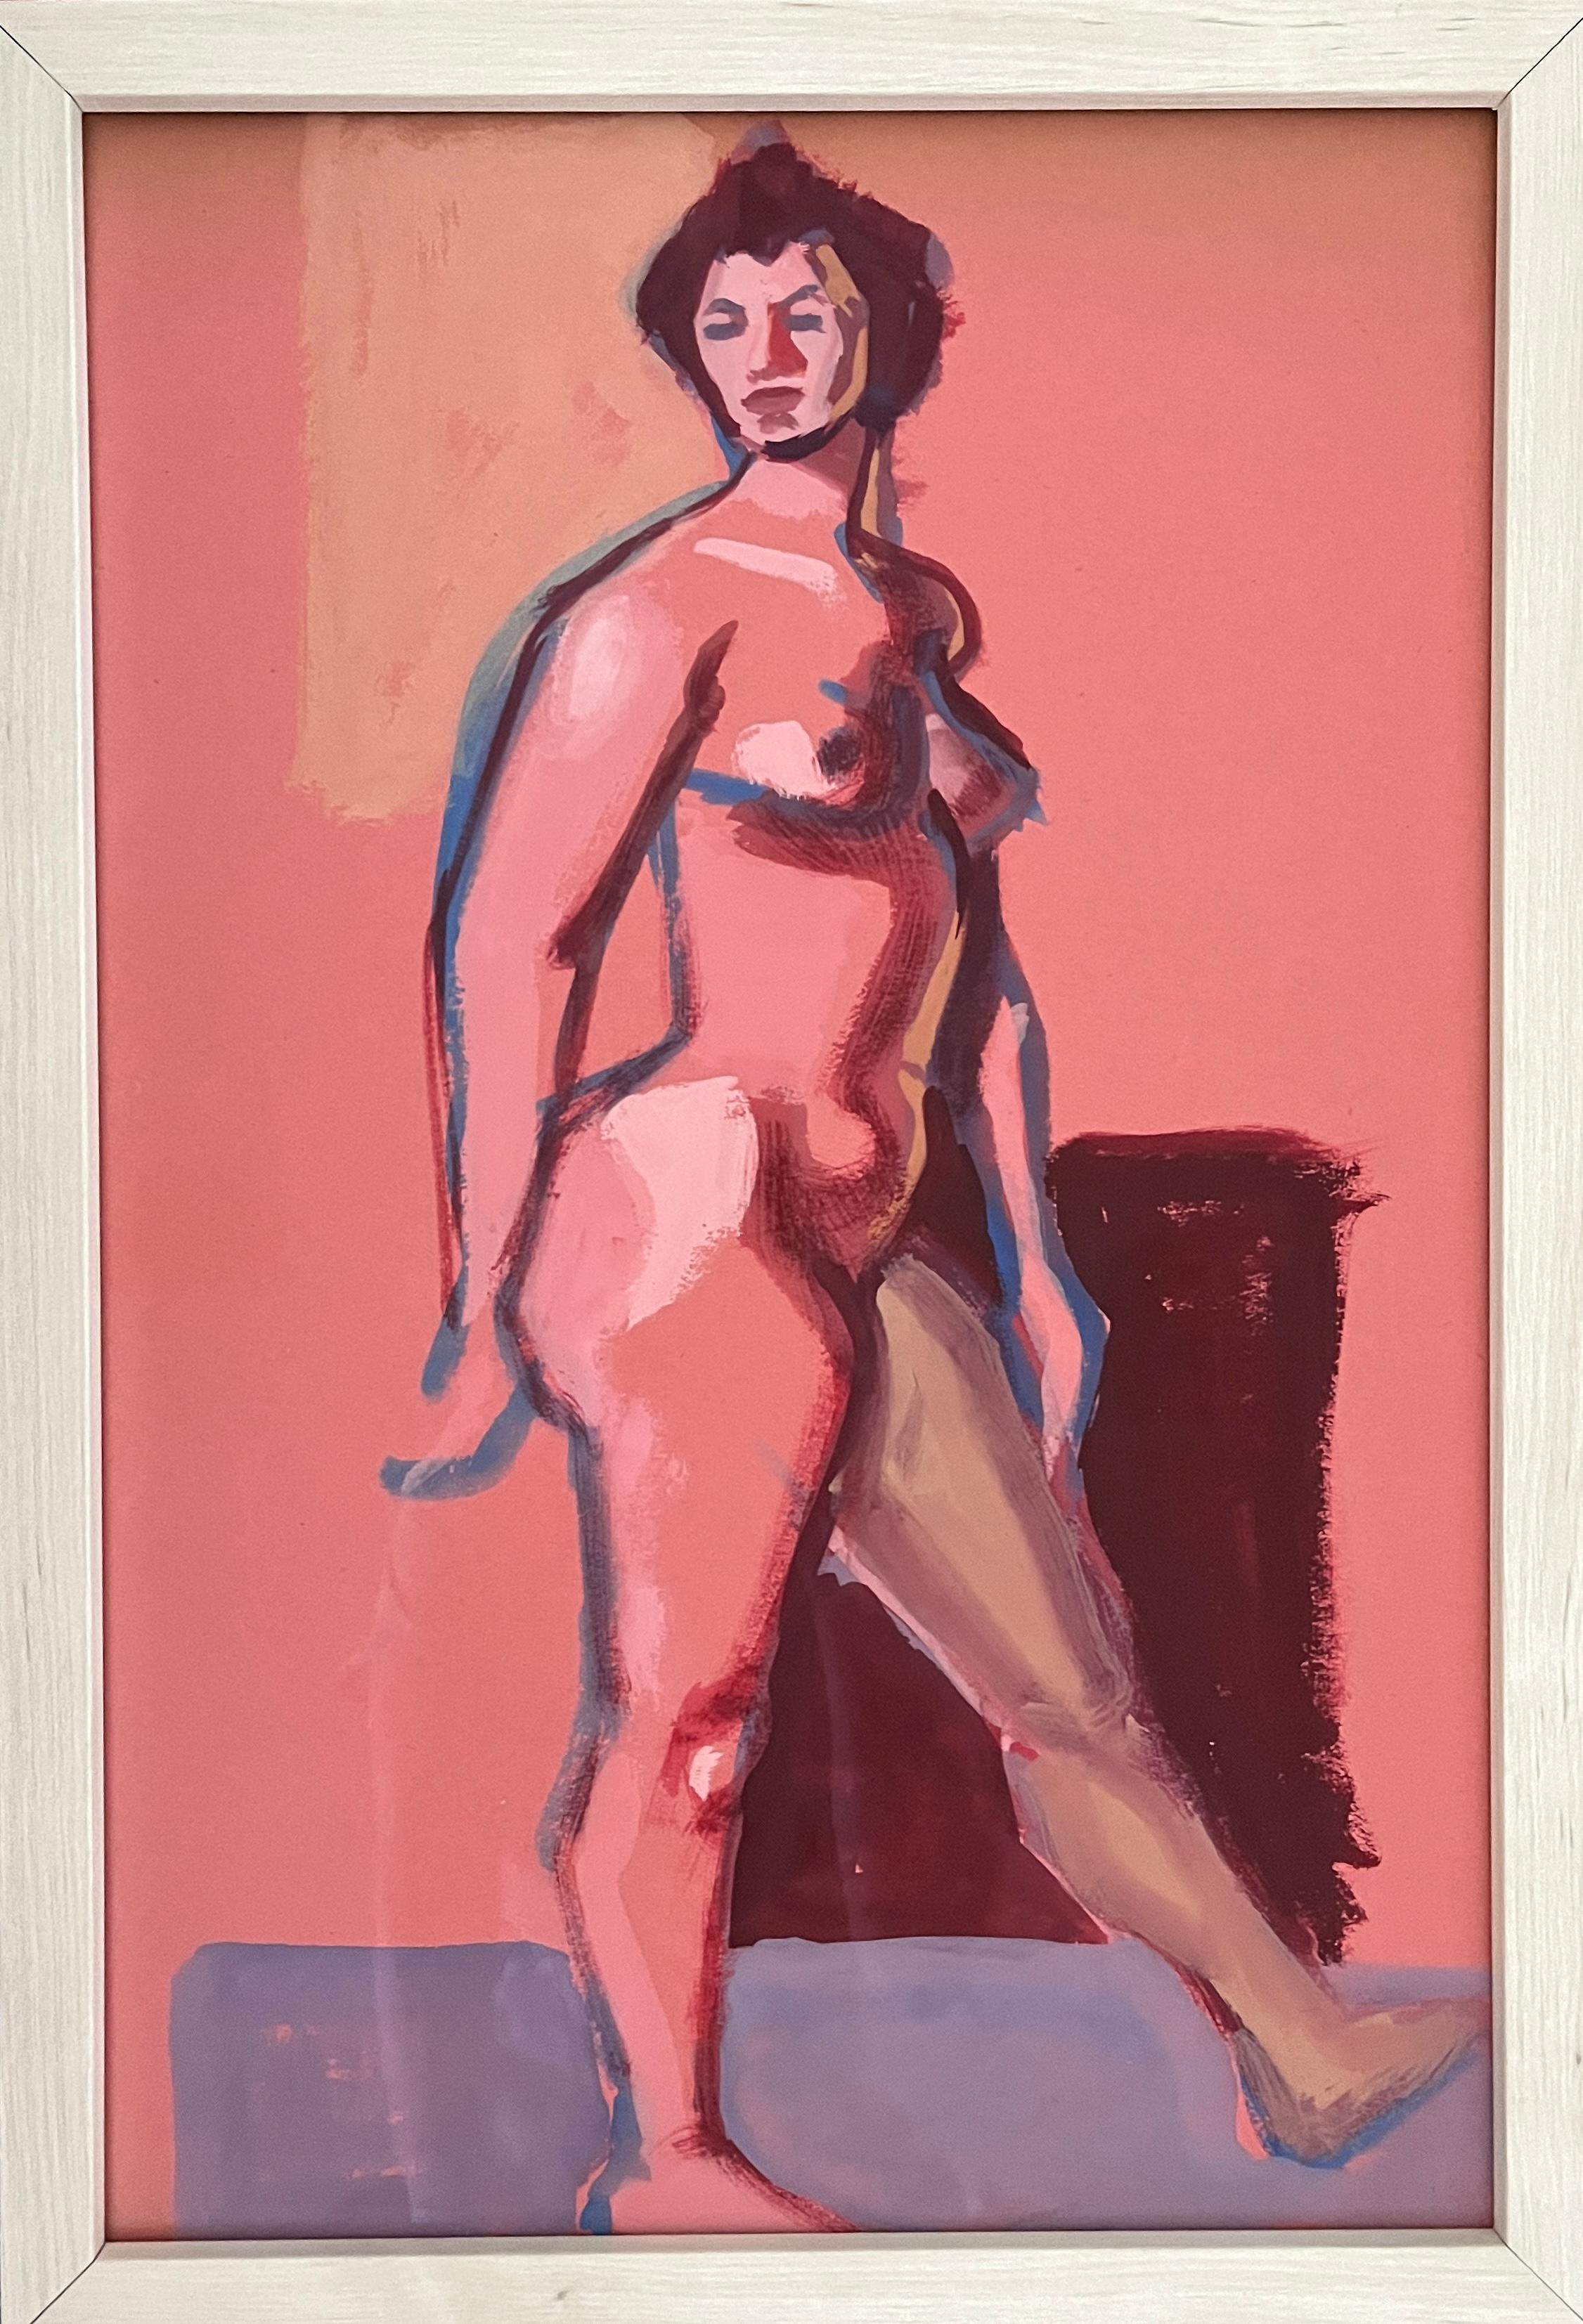 From the estate of Jerry Opper & Ruth Friedman Opper
Pink Lady
c. 1940-1950's
Gouache on Paper
15